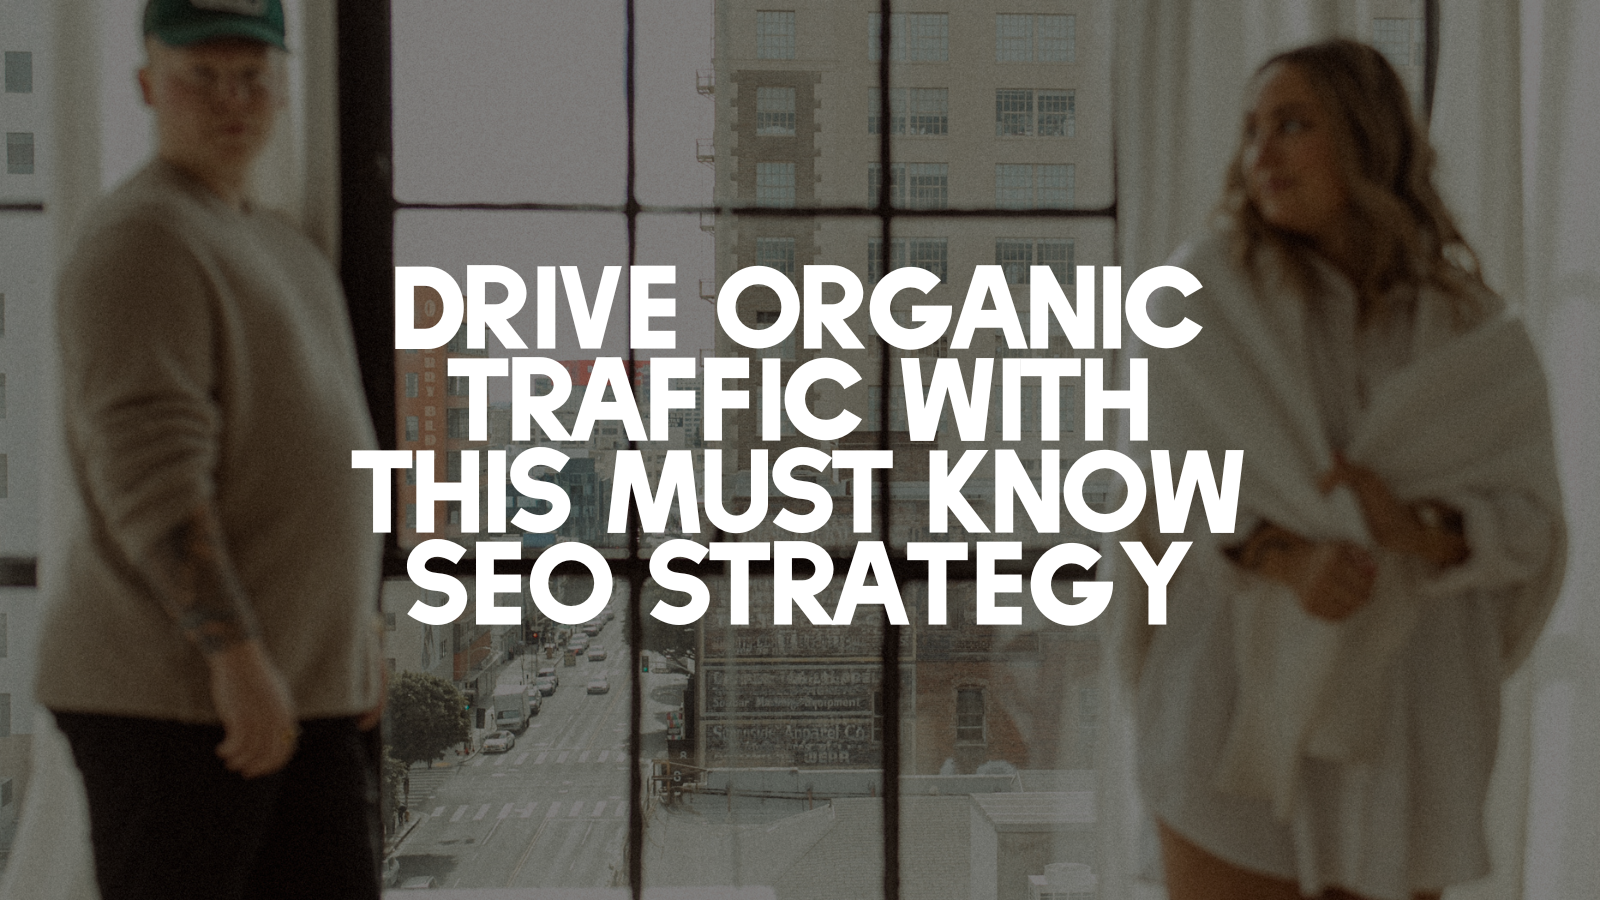 Drive organic traffic with this must know SEO strategy